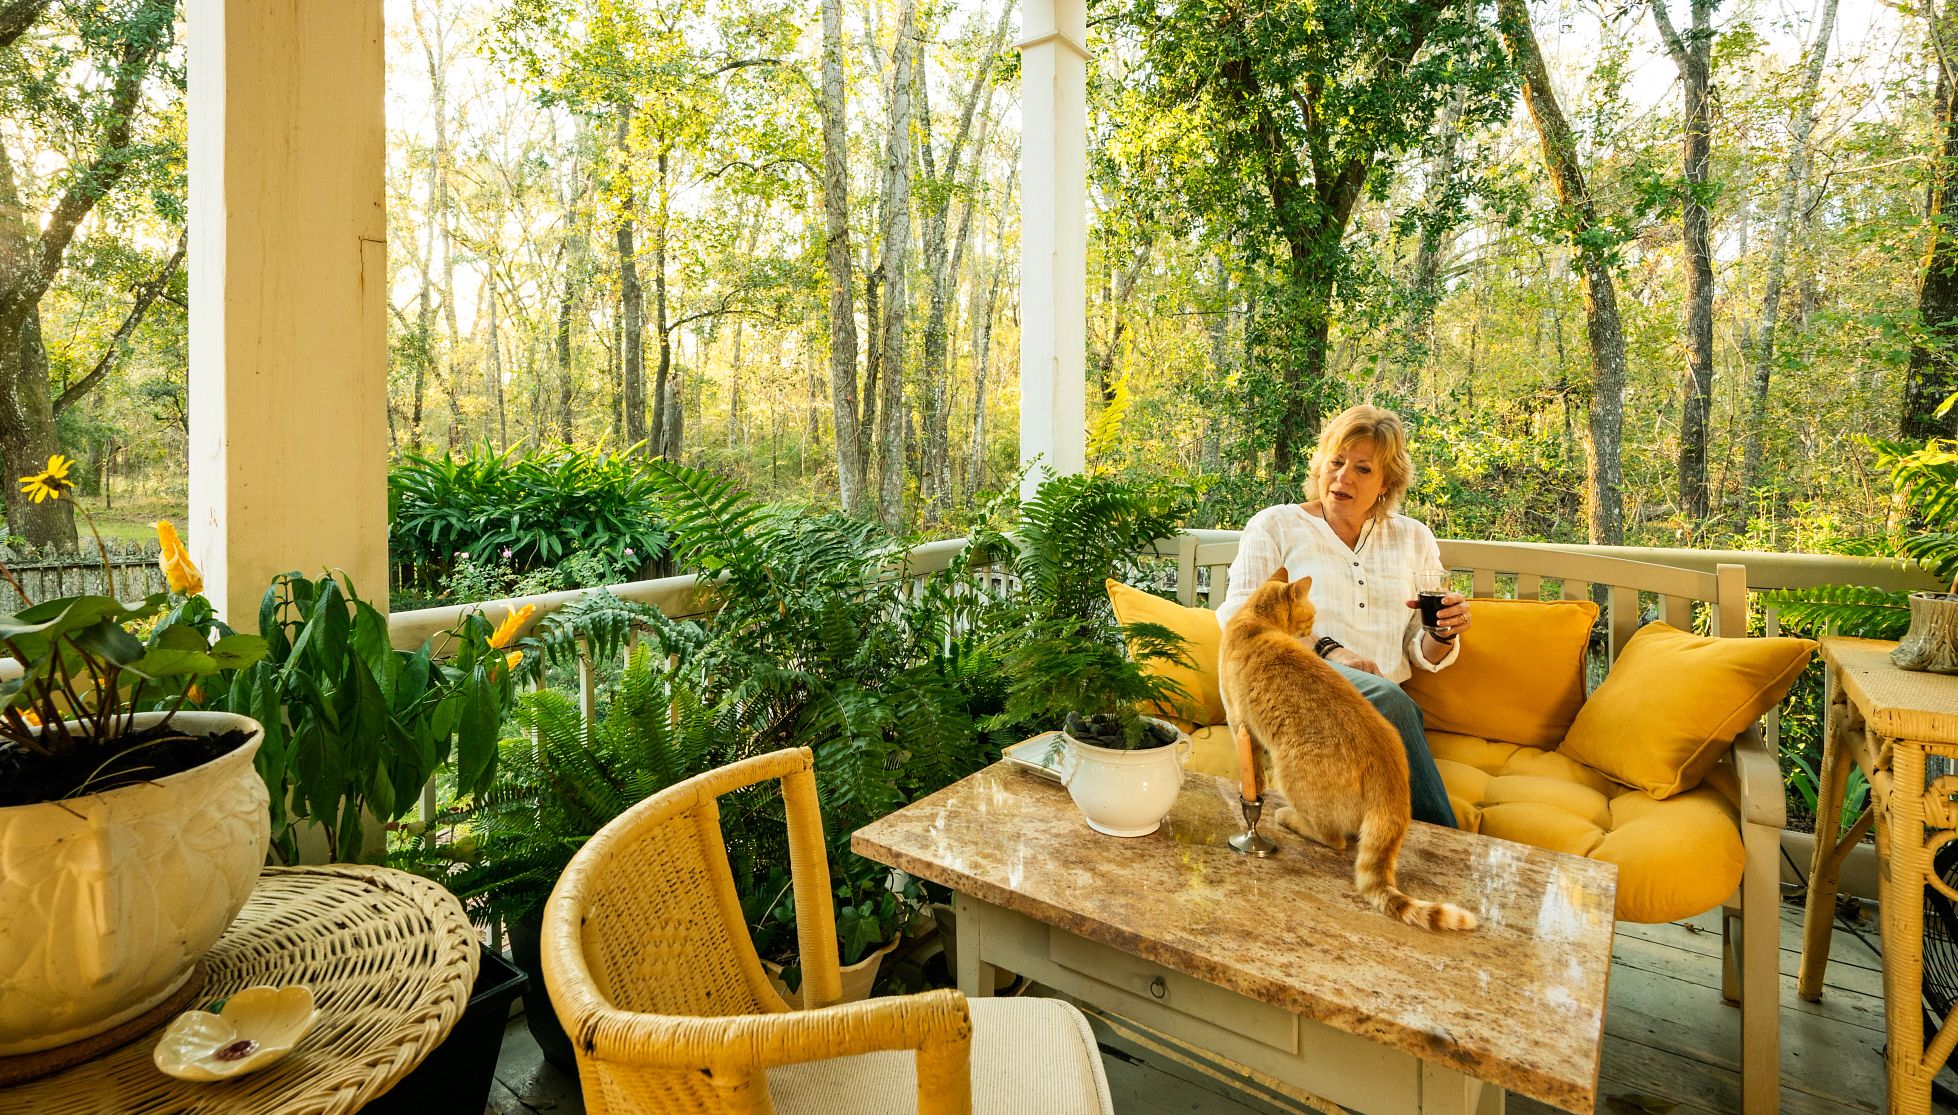 blond woman relaxes on the porch and pets a cat